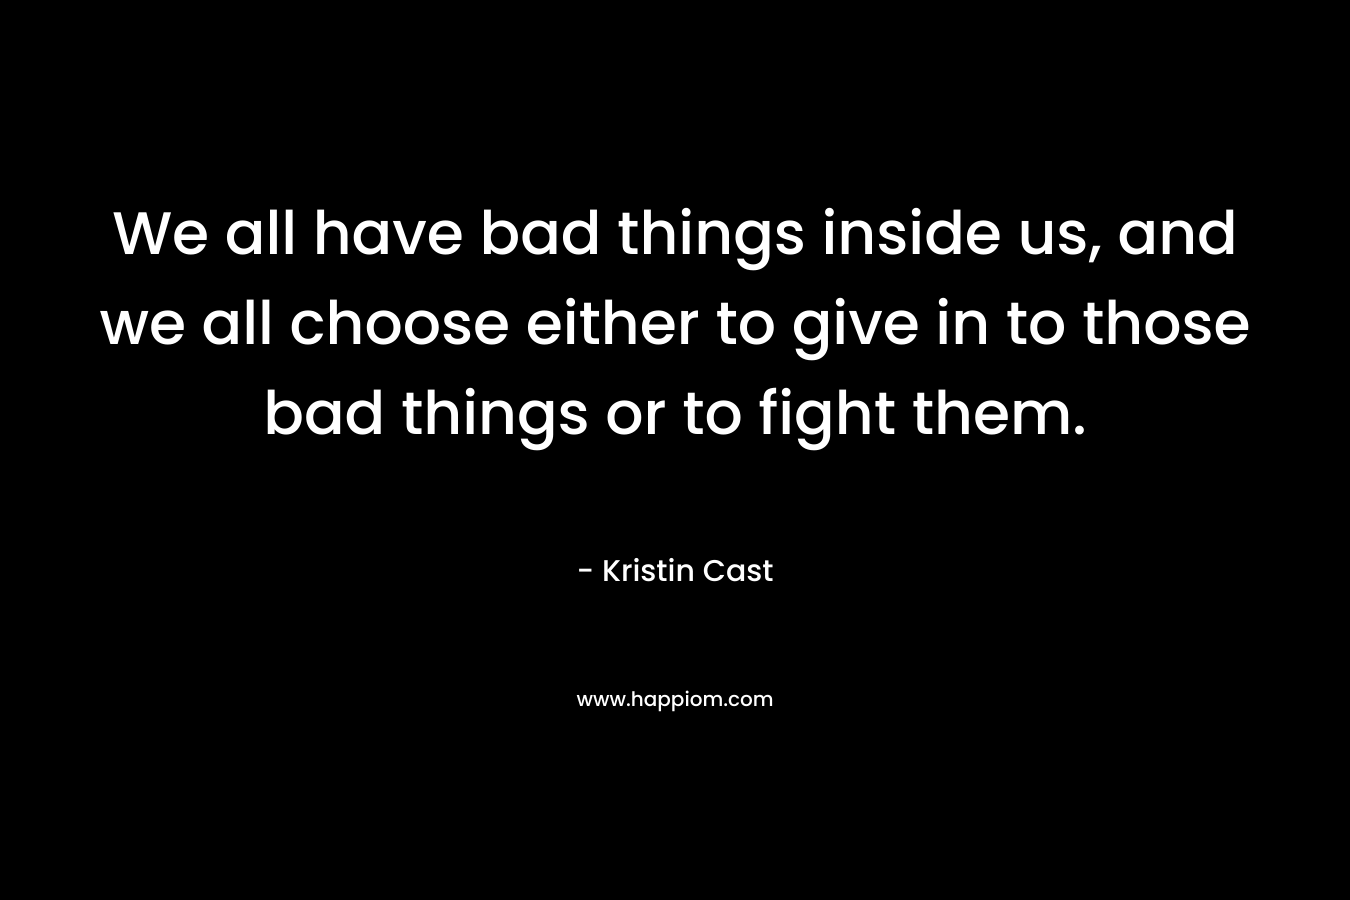 We all have bad things inside us, and we all choose either to give in to those bad things or to fight them. – Kristin Cast